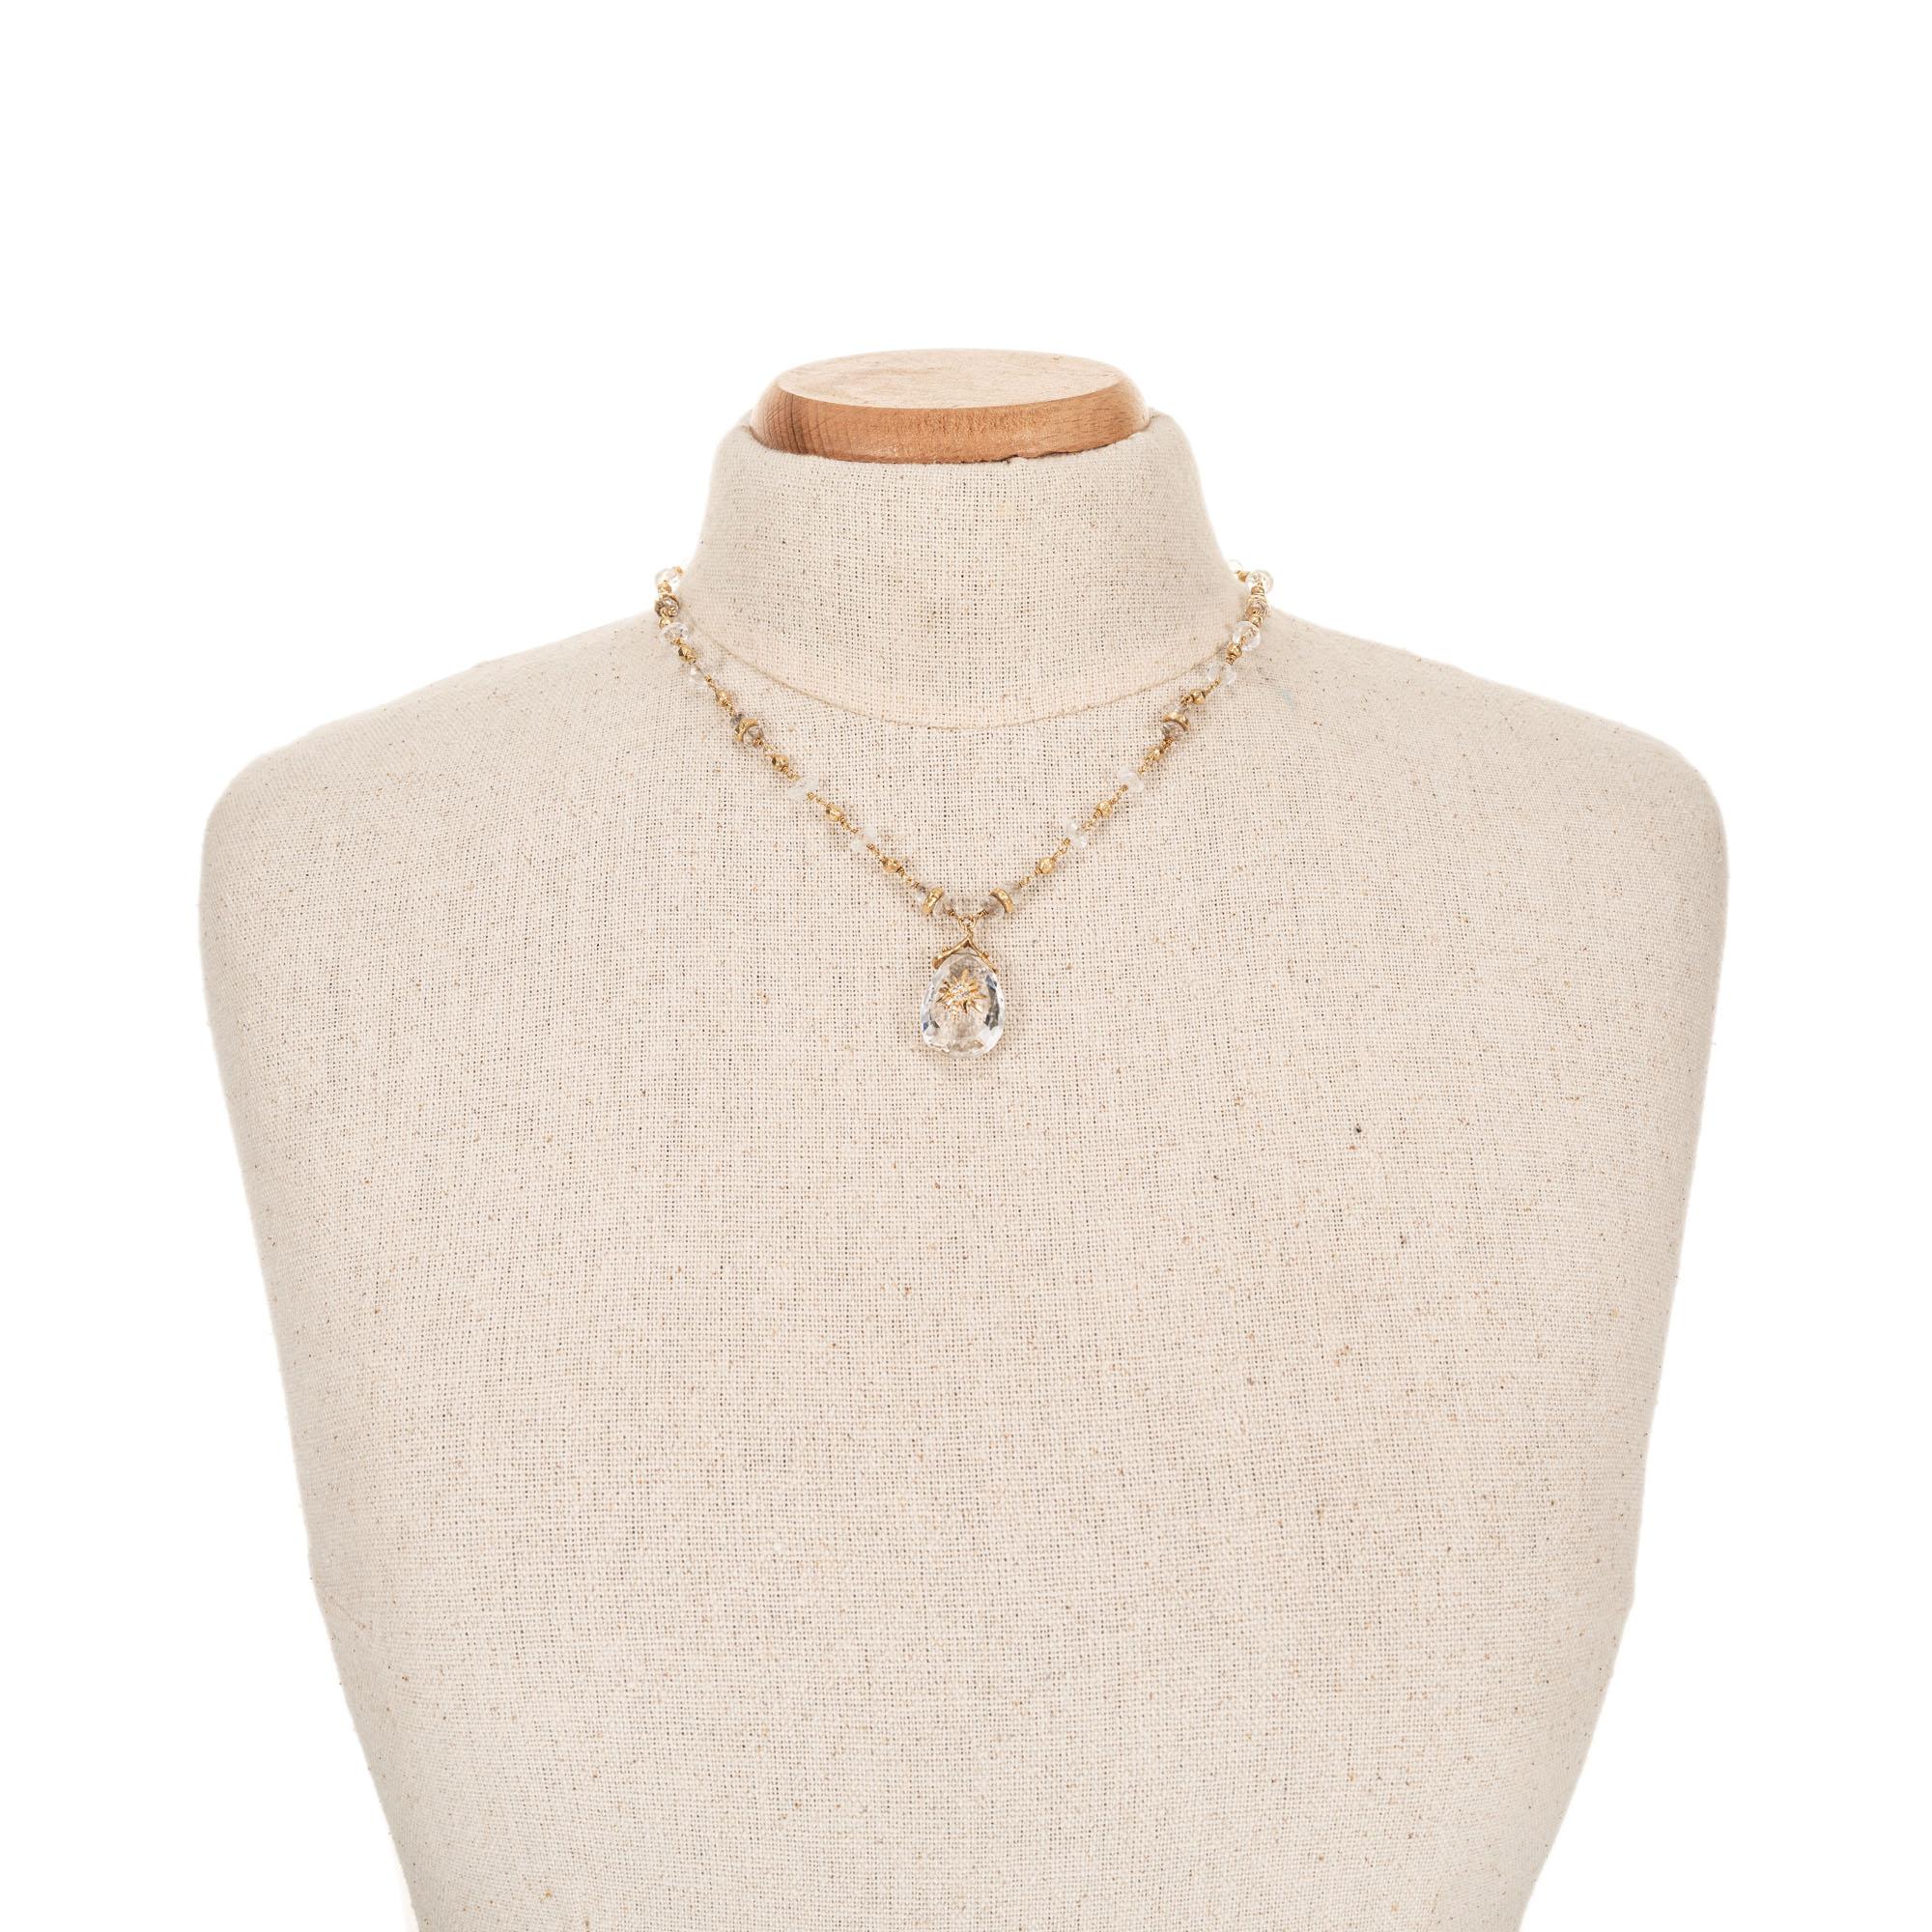 Talisman 12.00 Carat Quartz Gold Bead Pendant Necklace In Excellent Condition For Sale In Stamford, CT